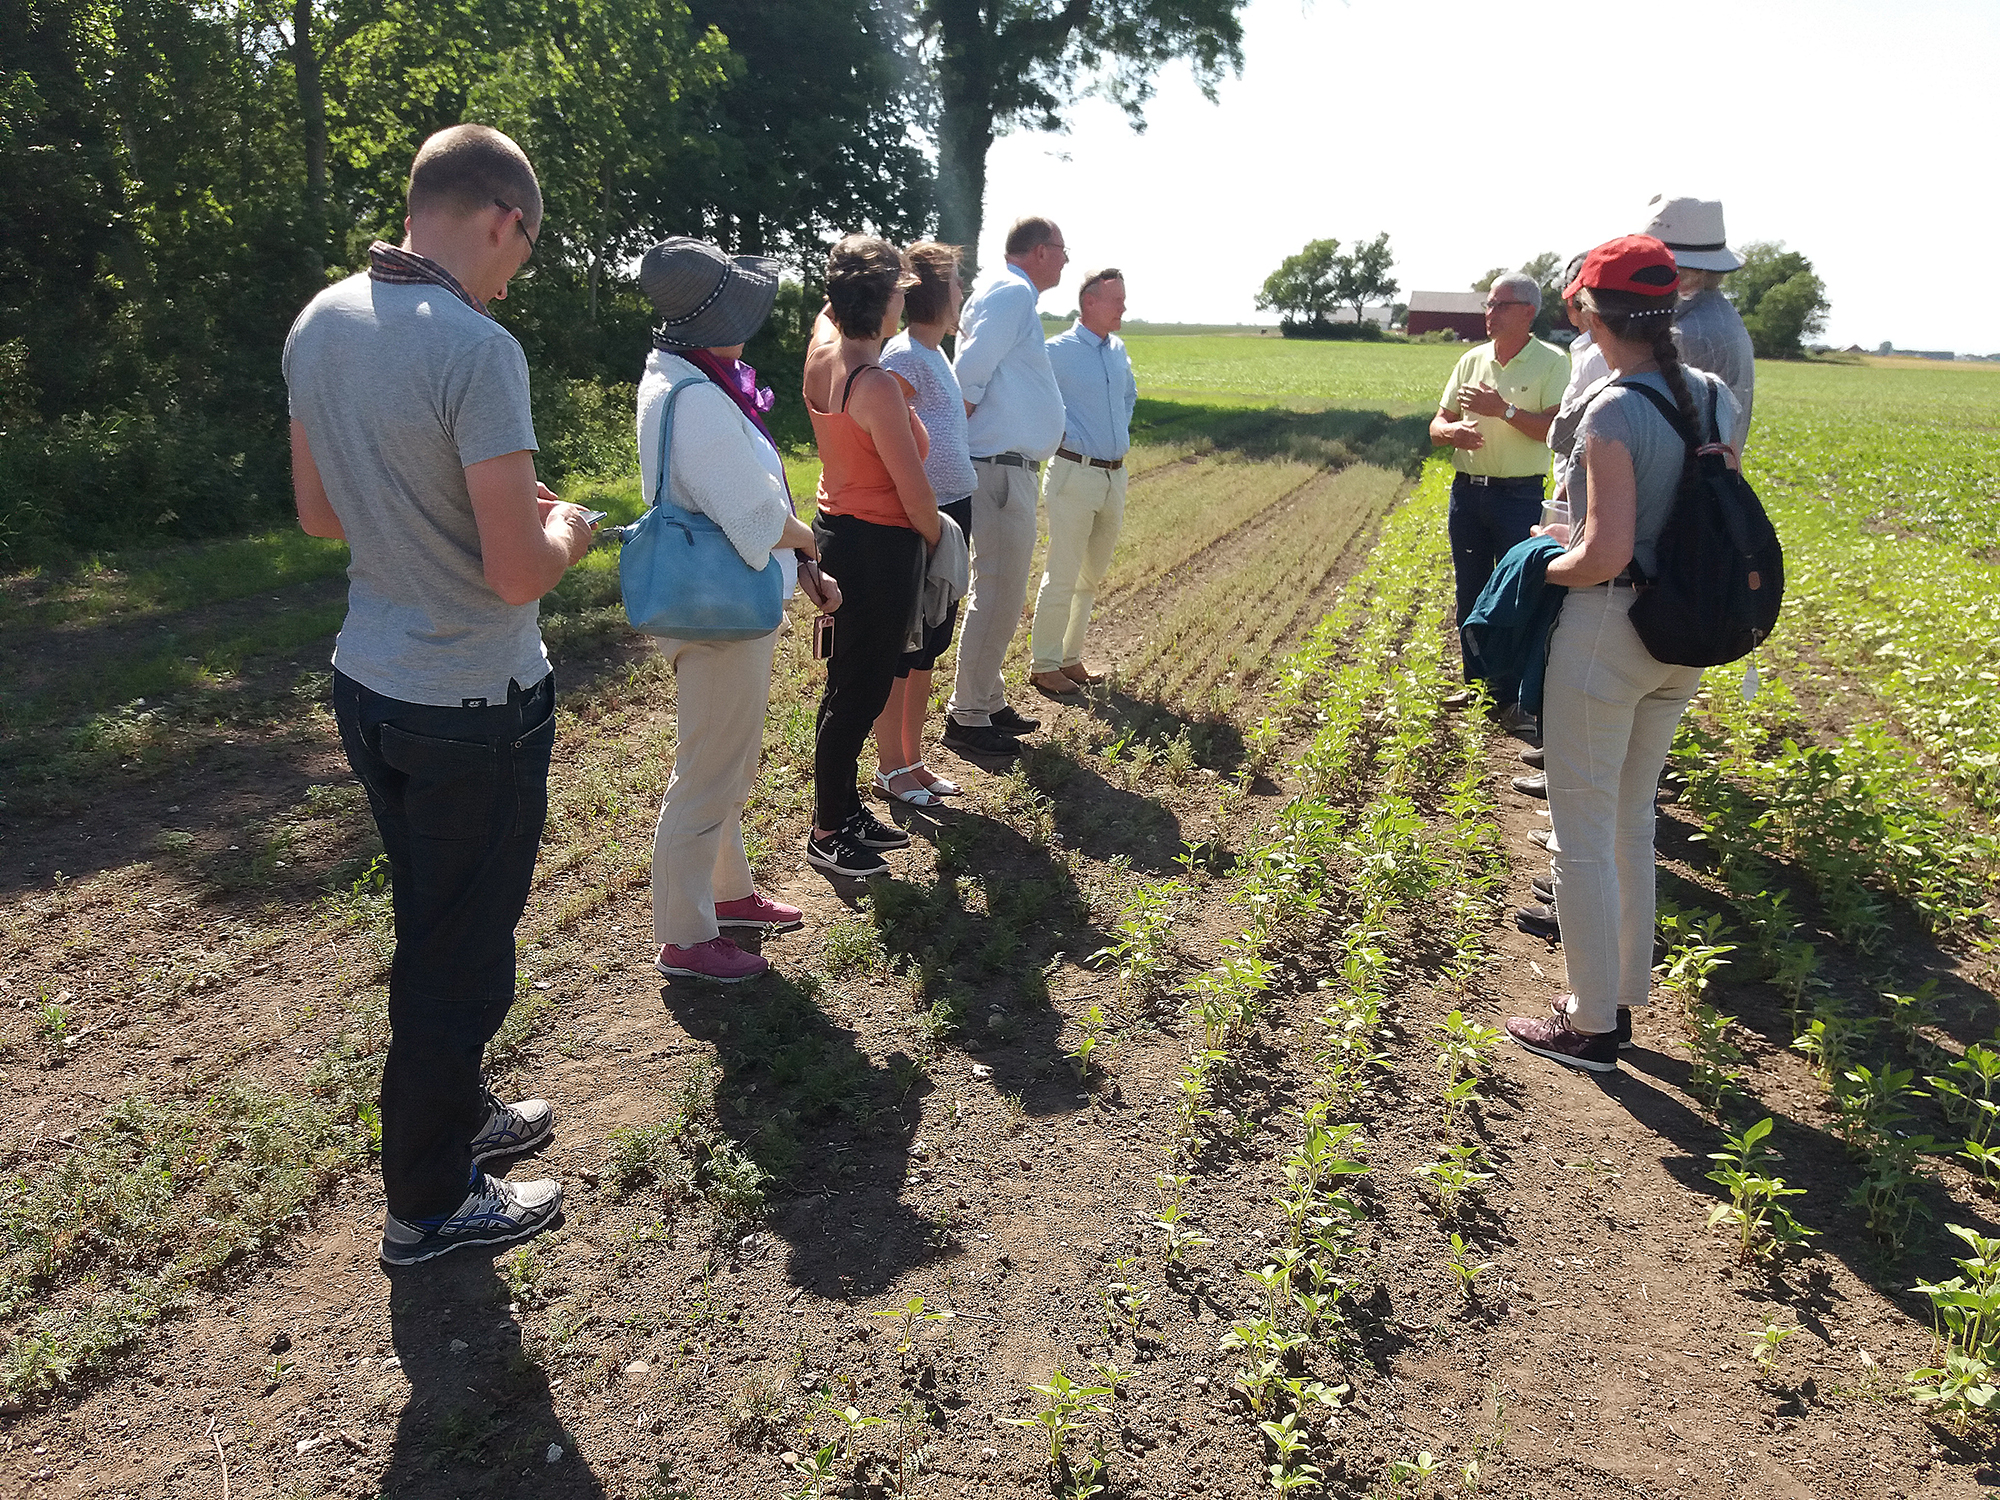 Group of people standing on a field looking at small crops. Photo.